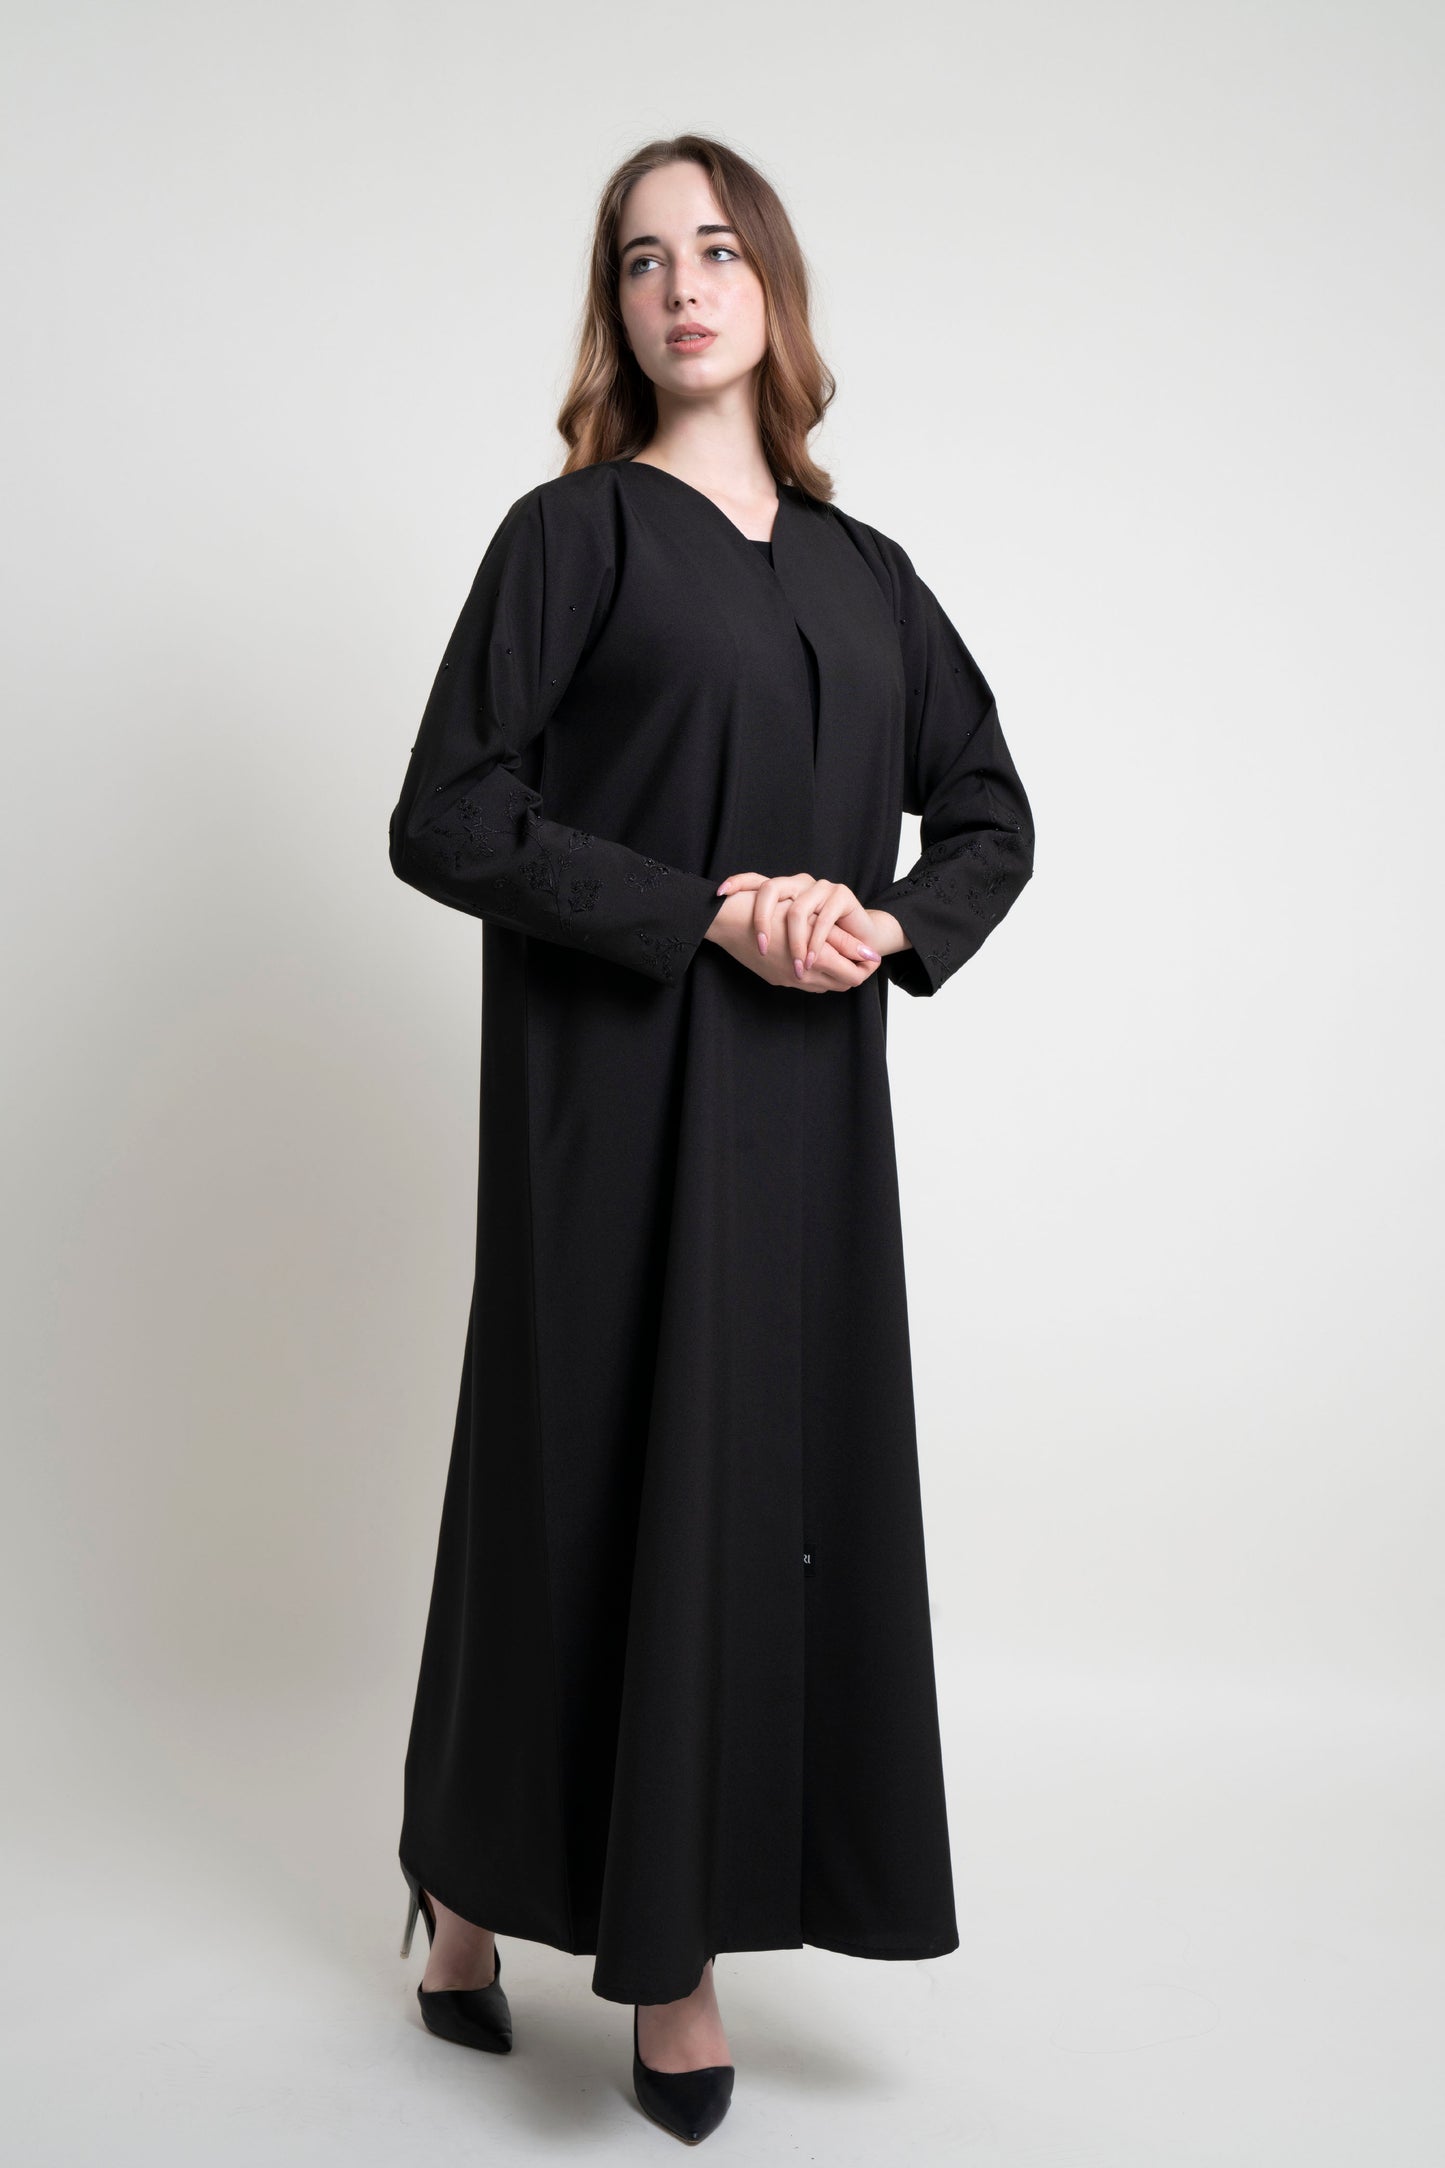 Girl wearing black abaya with floral thread embroidered sleeves with beads